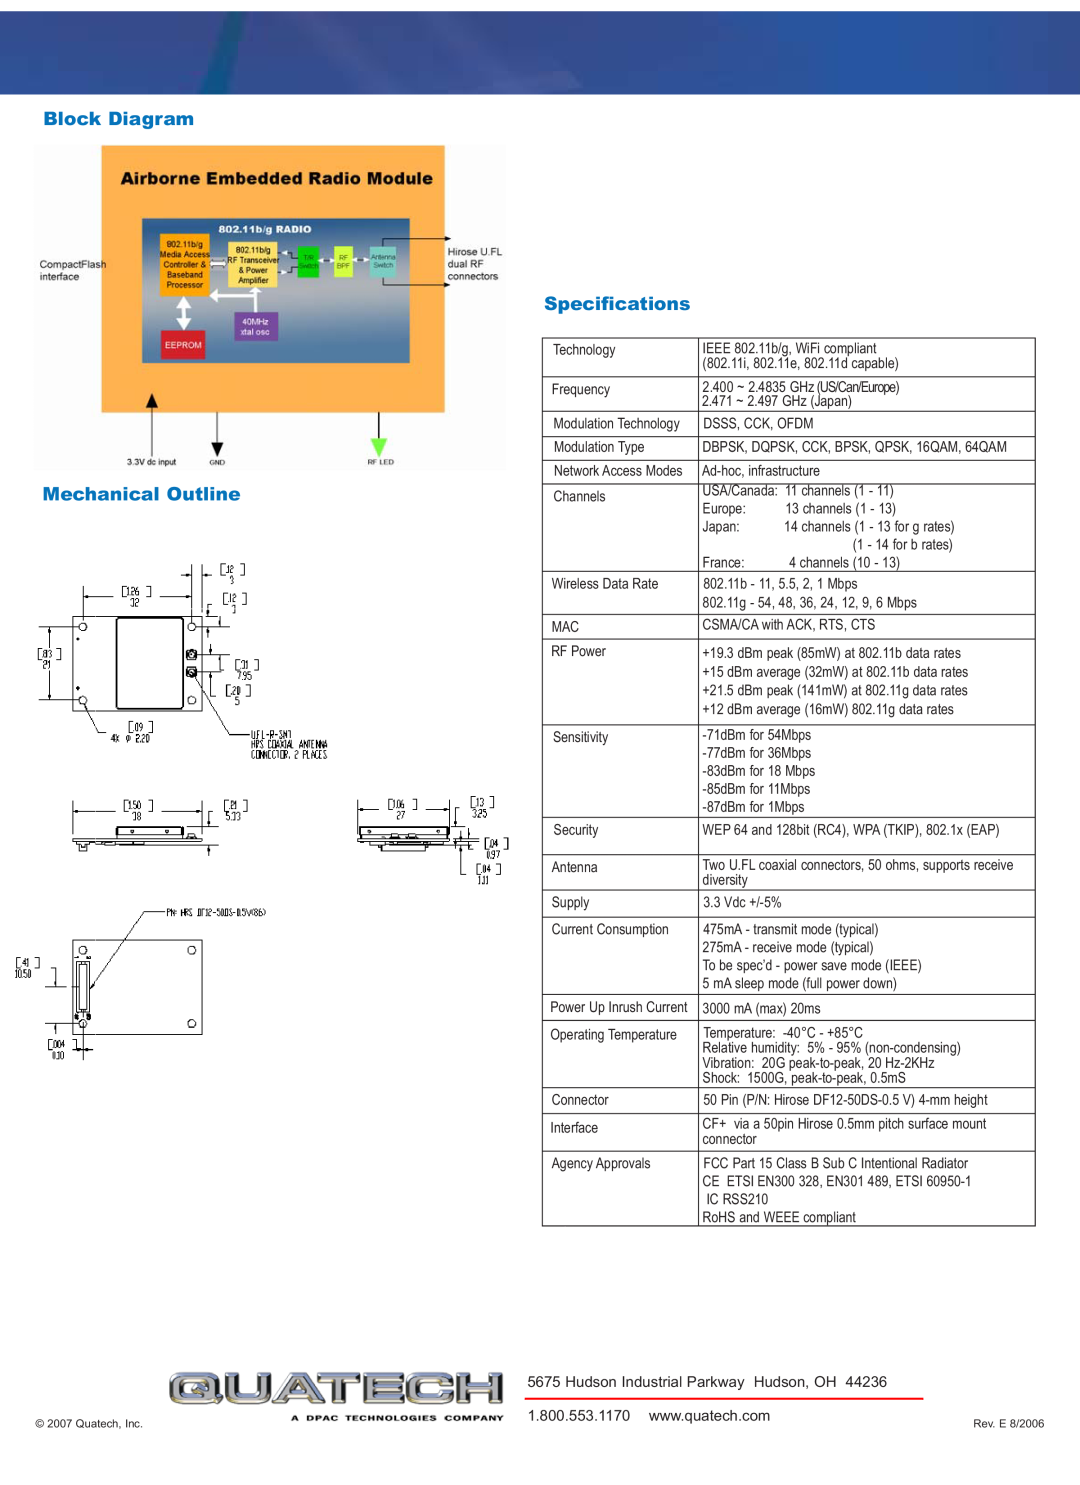 Quatech WLRG-RA-DP100, WLRB-RA-DP100 specifications Block Diagram Mechanical Outline, Specifications 